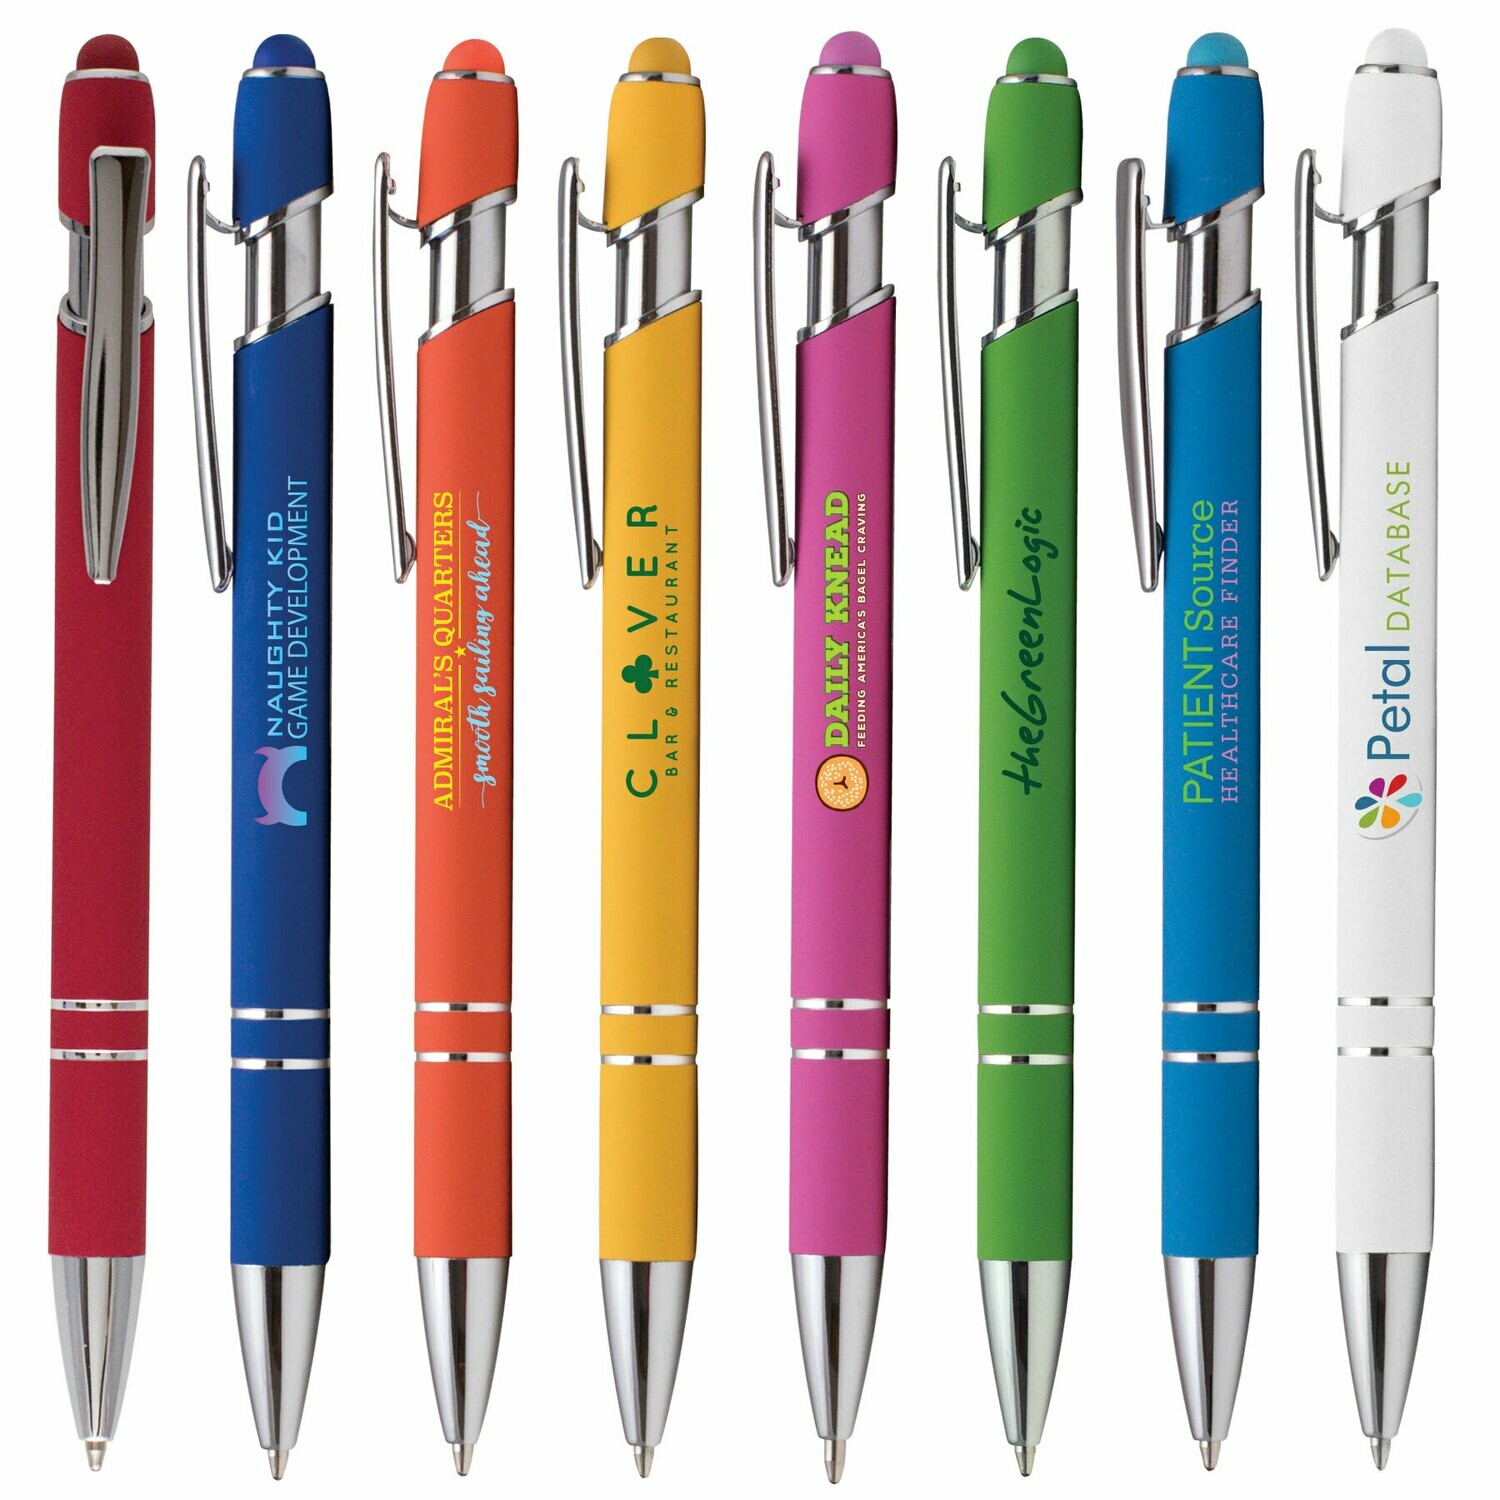 Ellipse Softy Brights With Stylus ColorJet